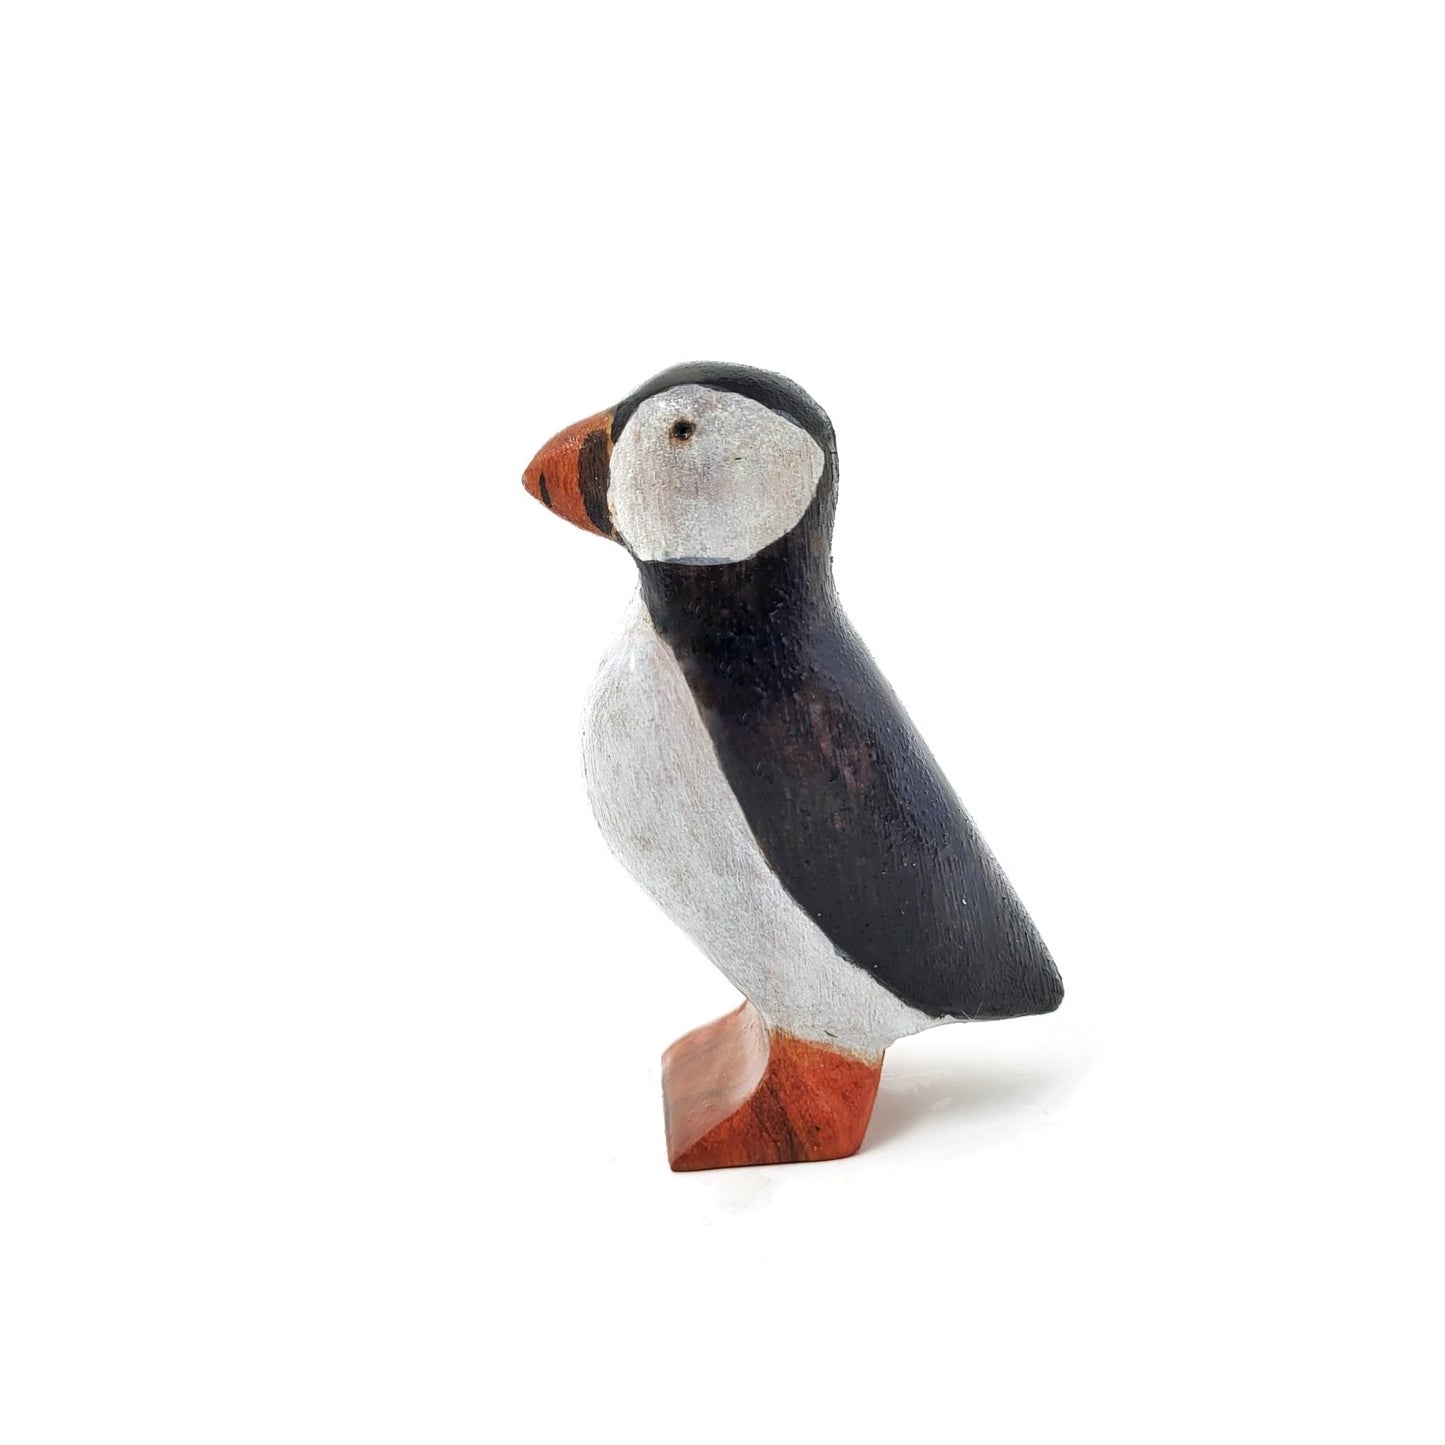 Pierre the Puffin